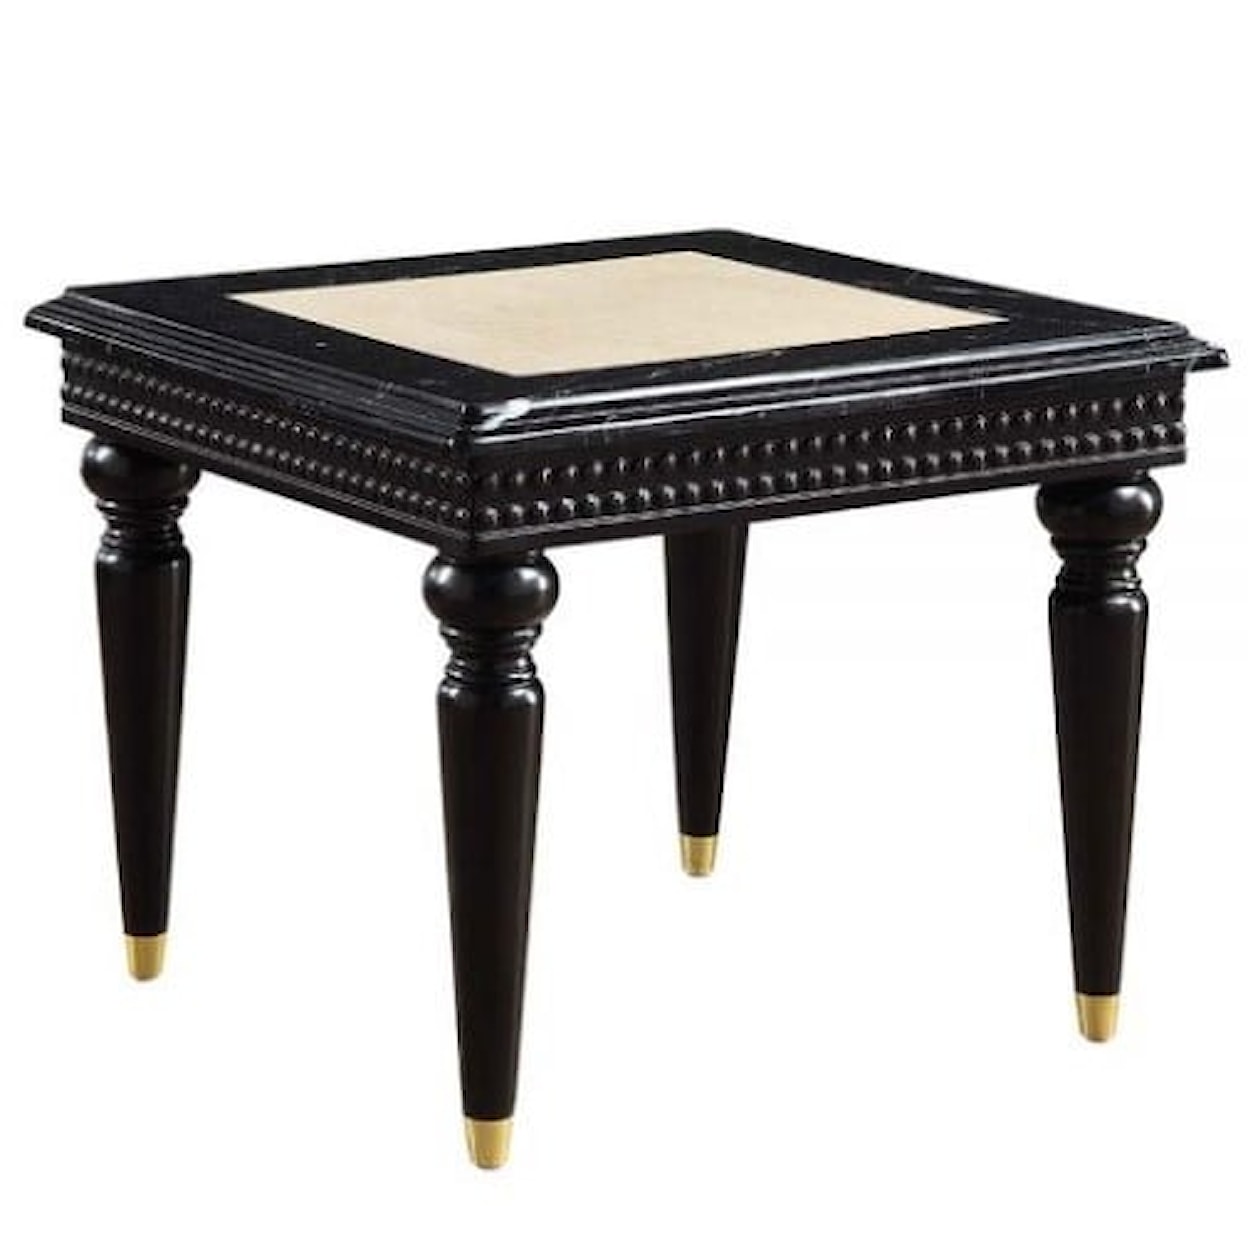 Acme Furniture Tayden End Table W/Marble Top